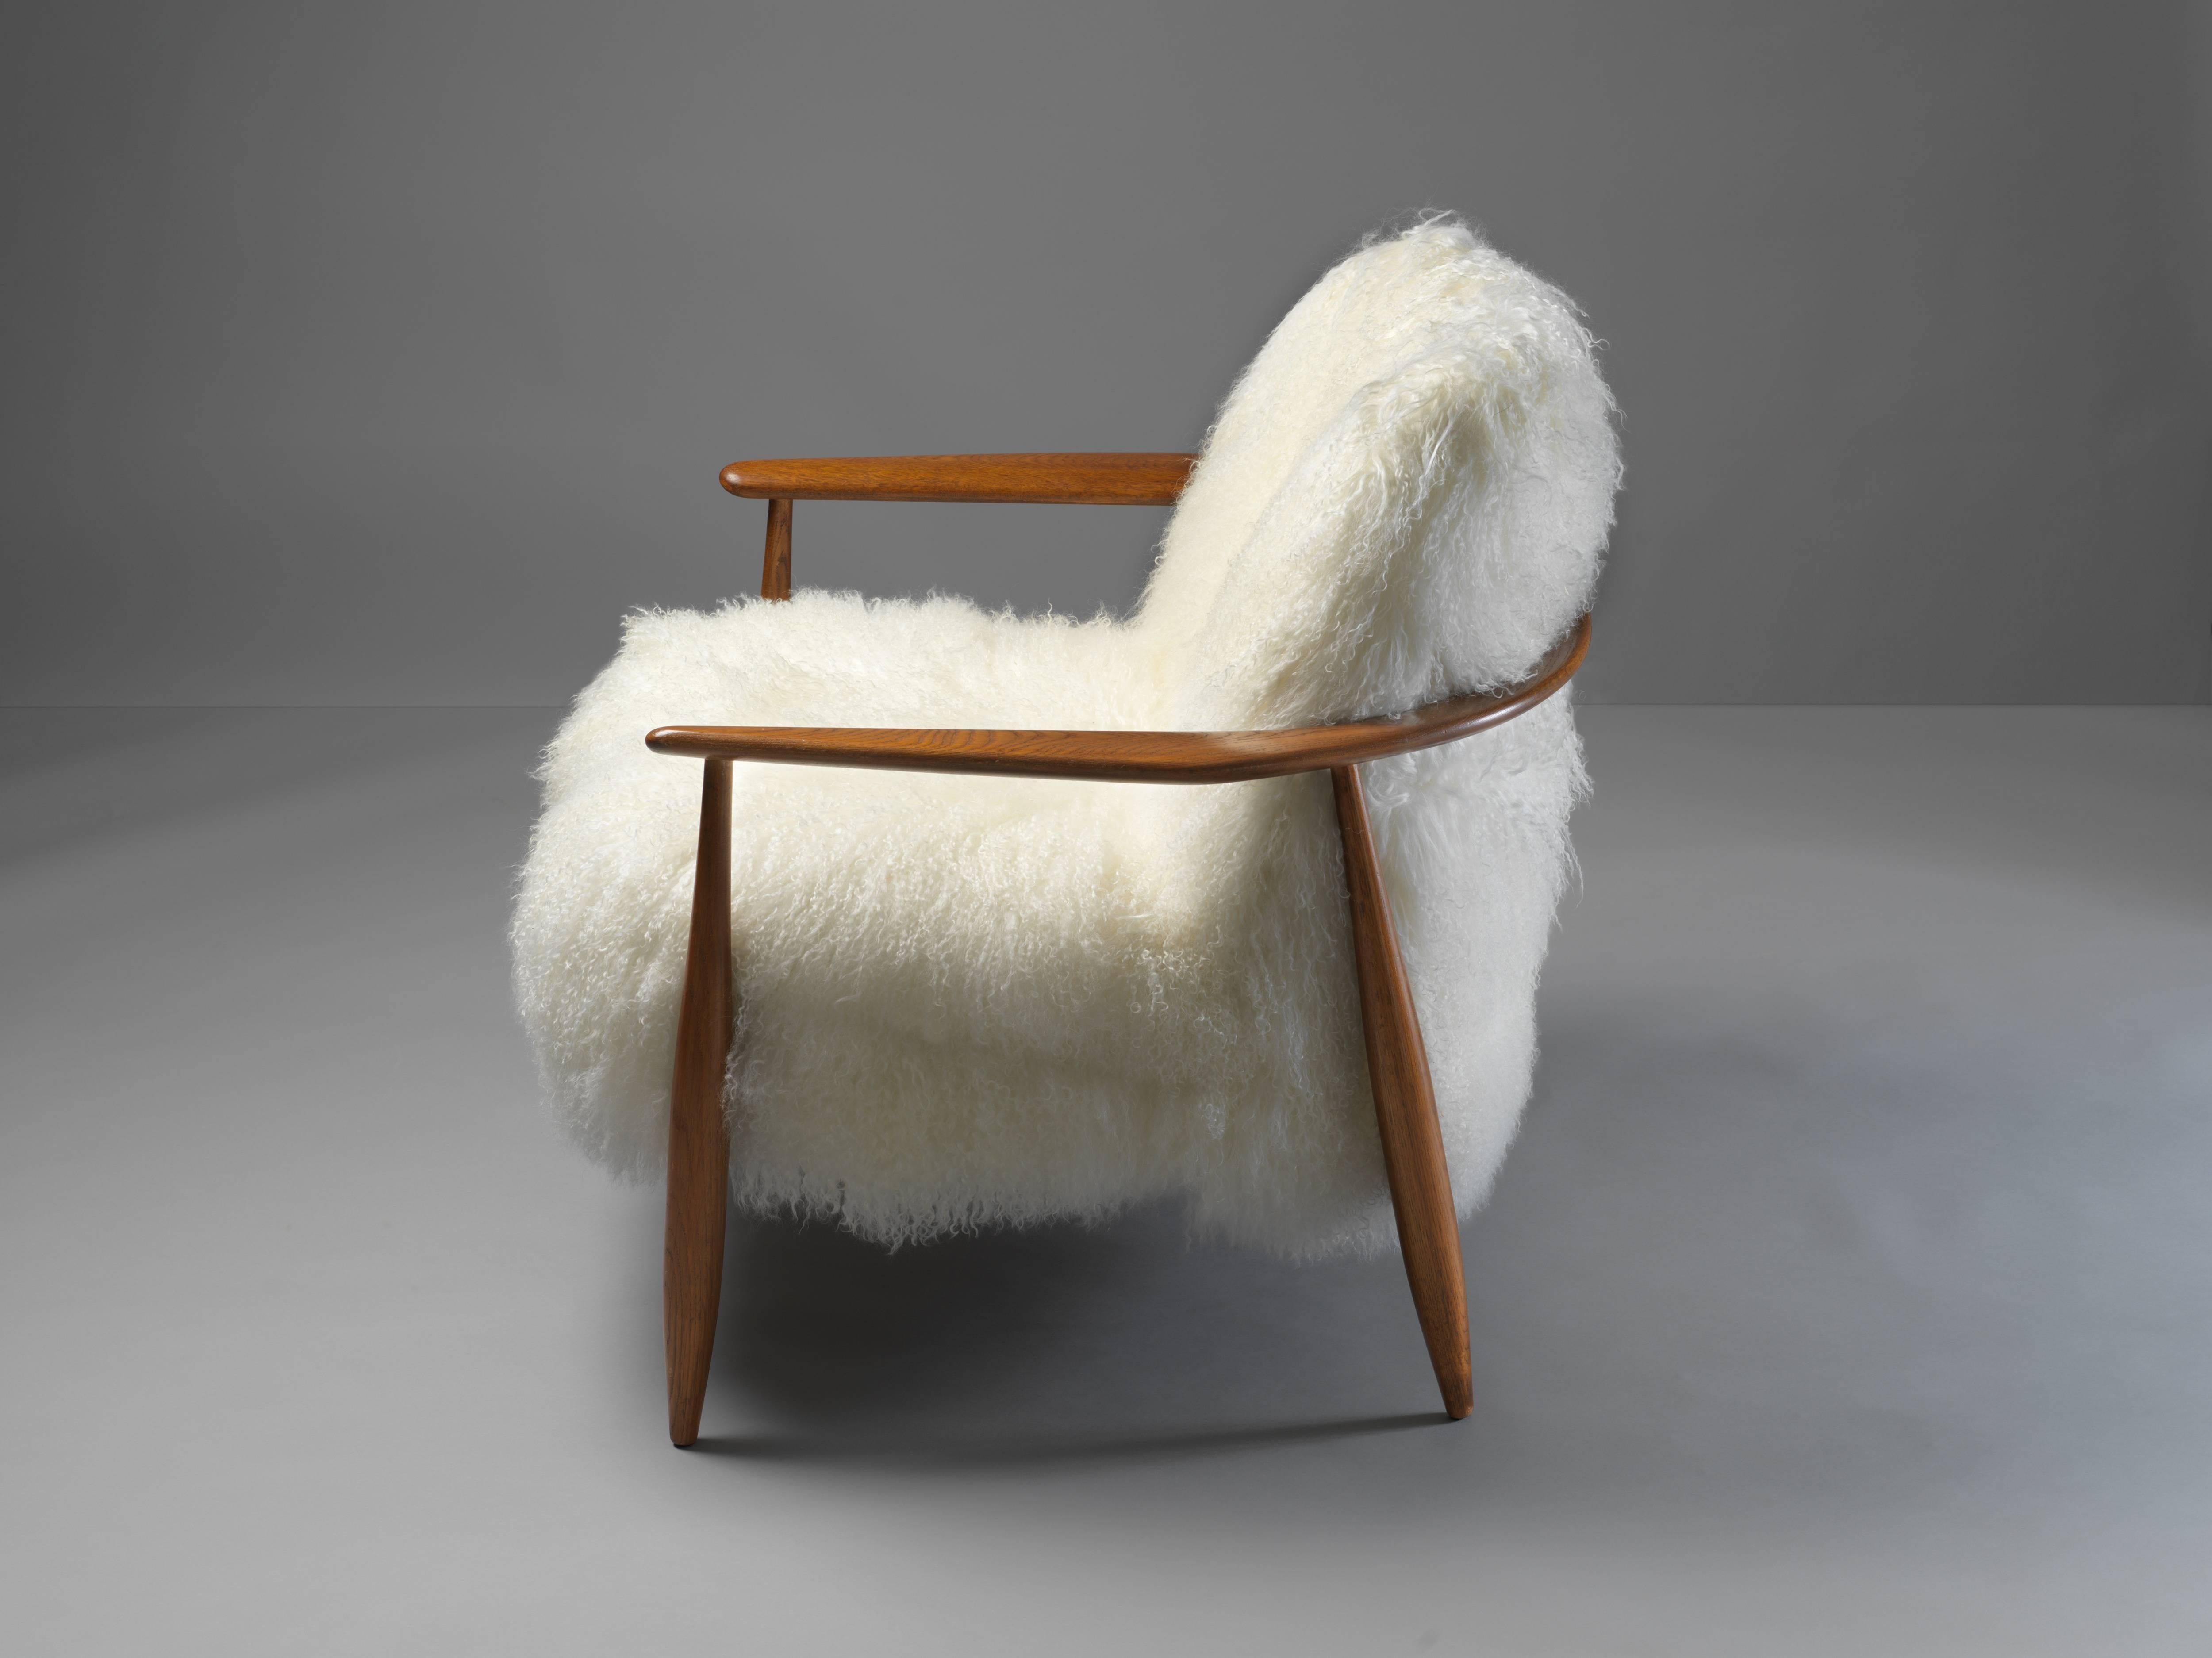 An organic lounge chair, design attributed to Danish designer Ib Kofod-Larsen. Upholstered in long lambskin, frame of stained oak. Presumably manufactured by Swedish Säffle Möbelfabrik.